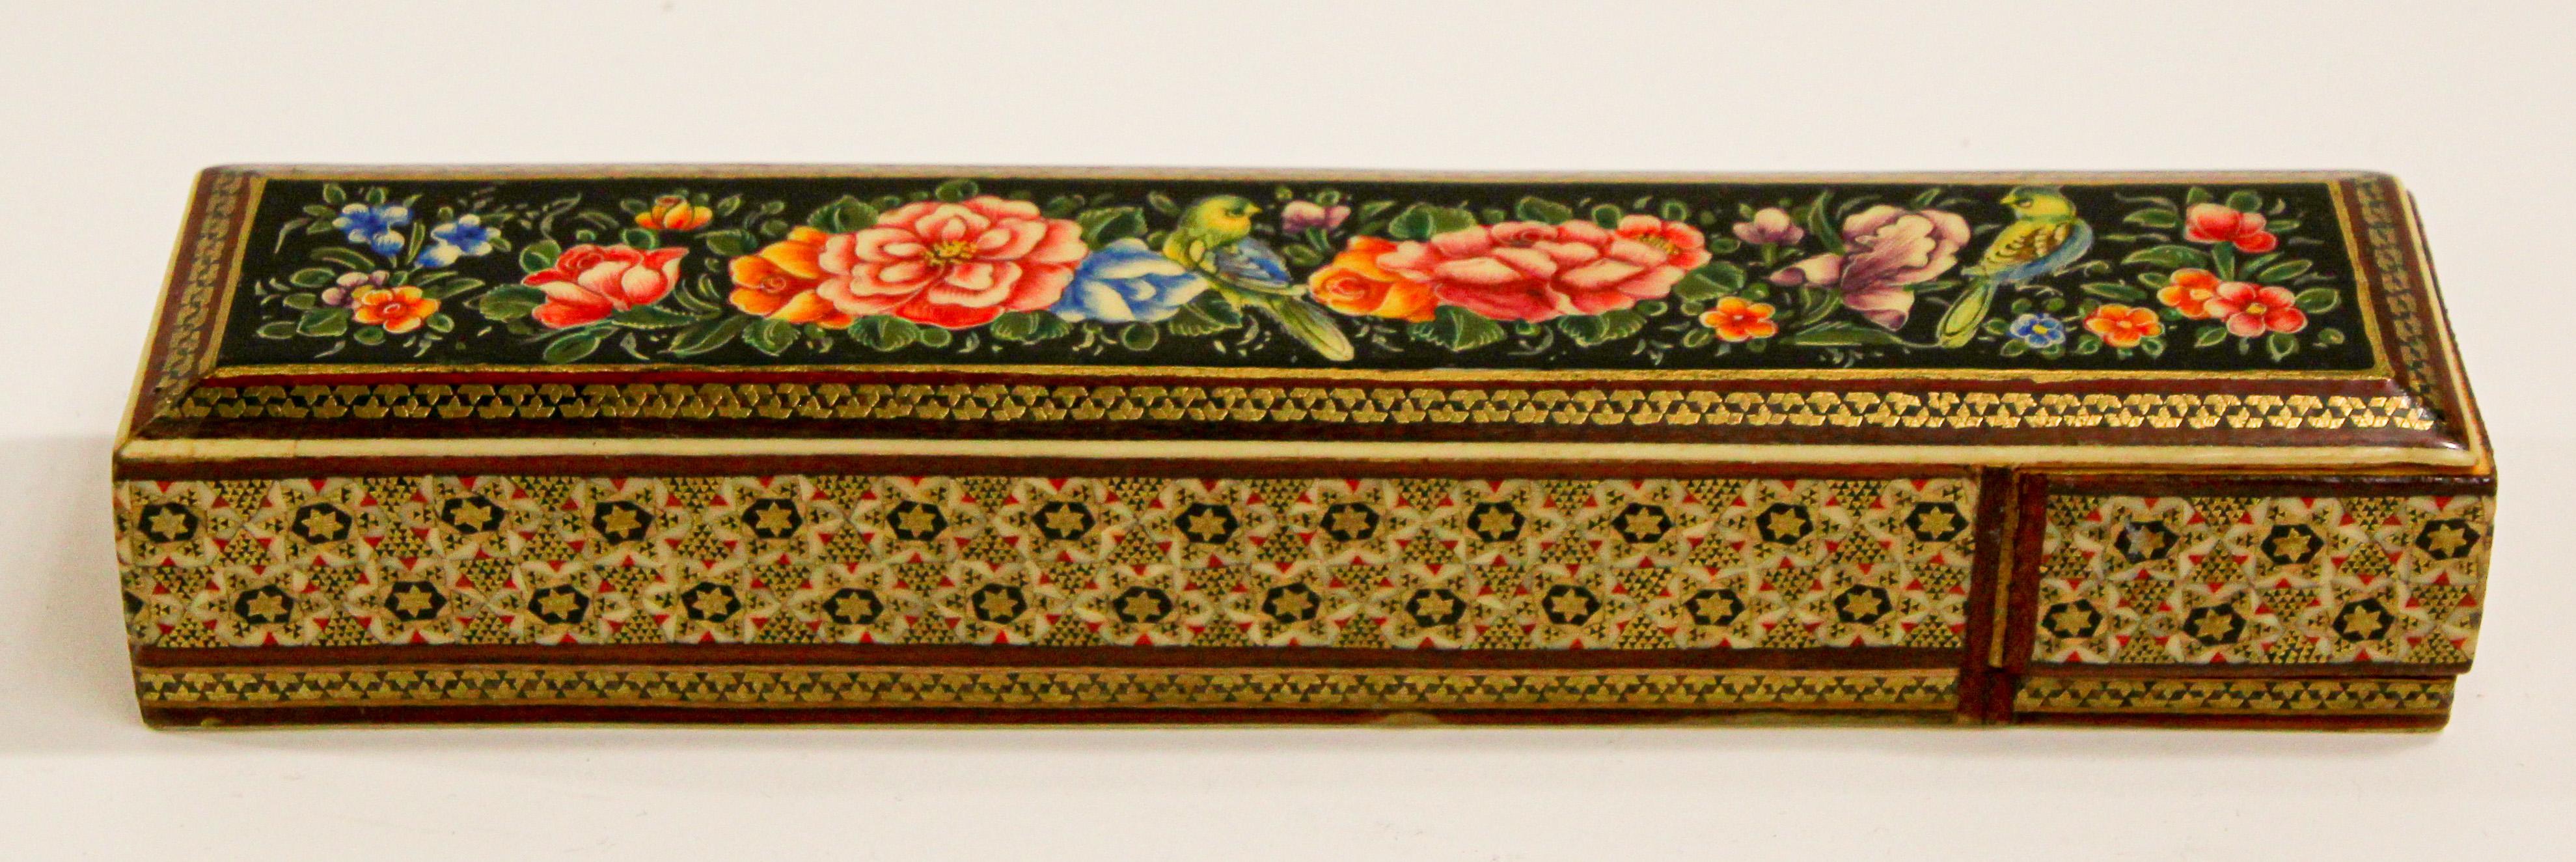 Persian Lacquer Pen Box Hand Painted with Floral Design For Sale 1